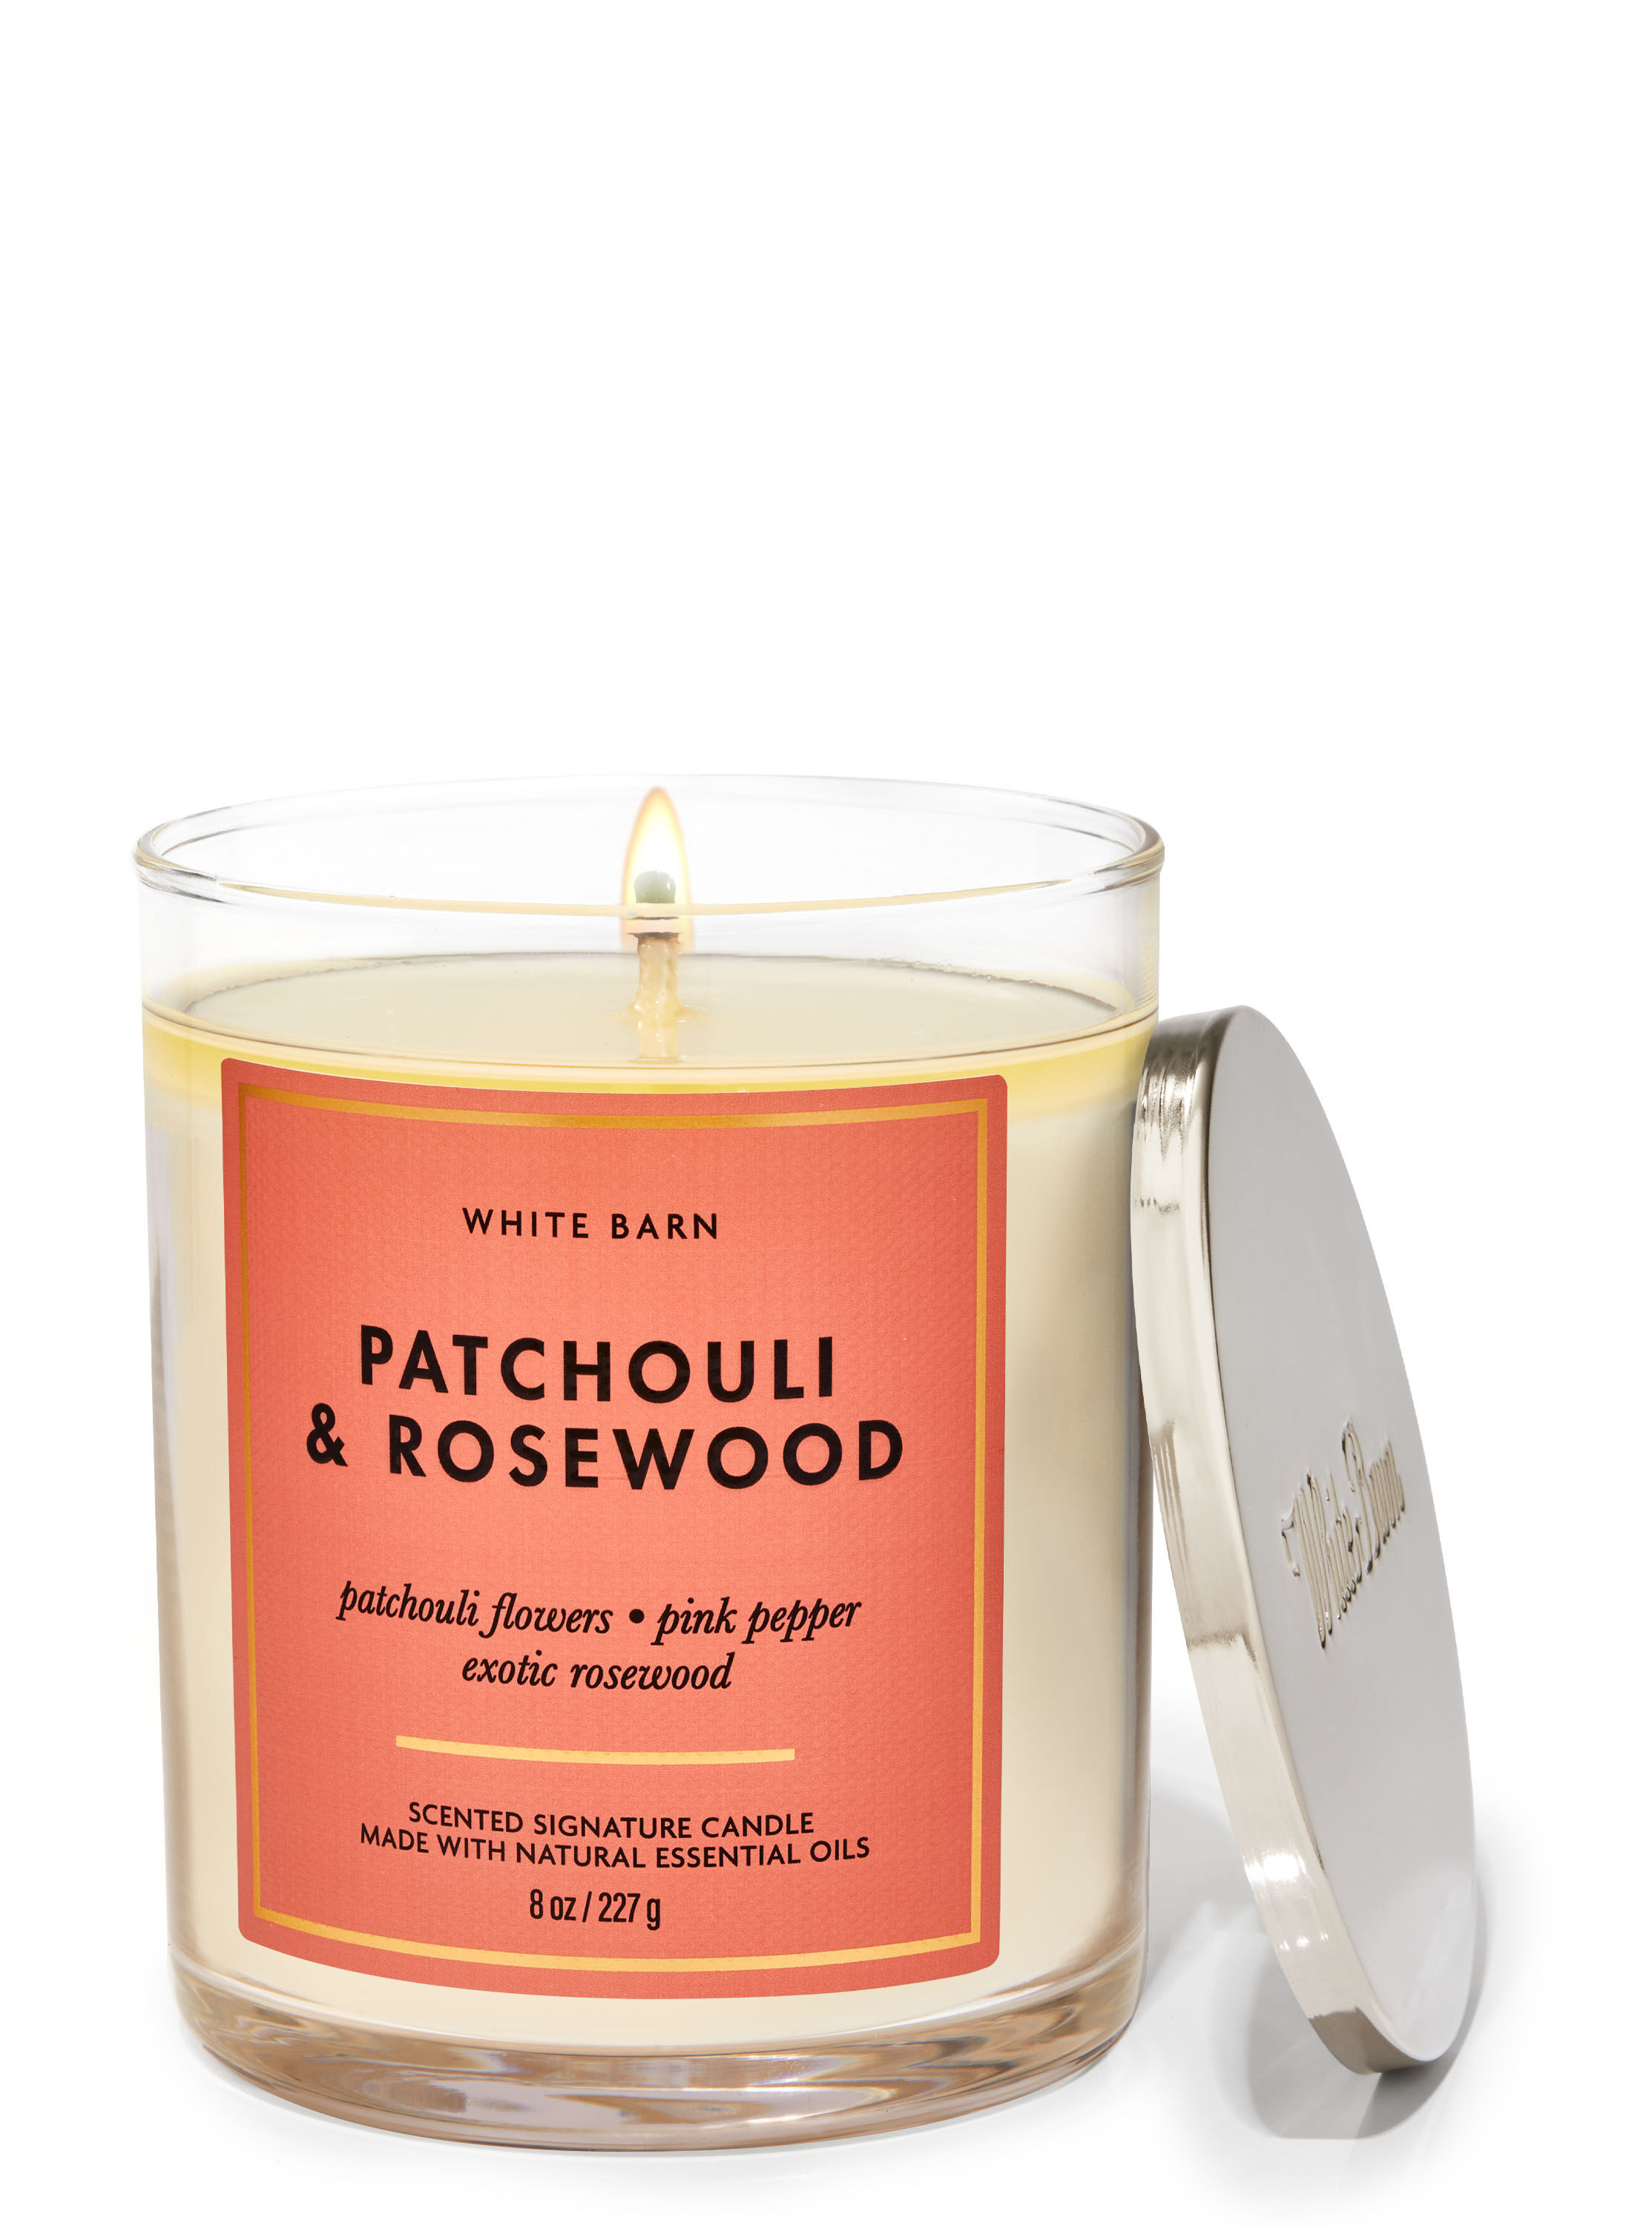 Patchouli & Rosewood Single Wick Candle